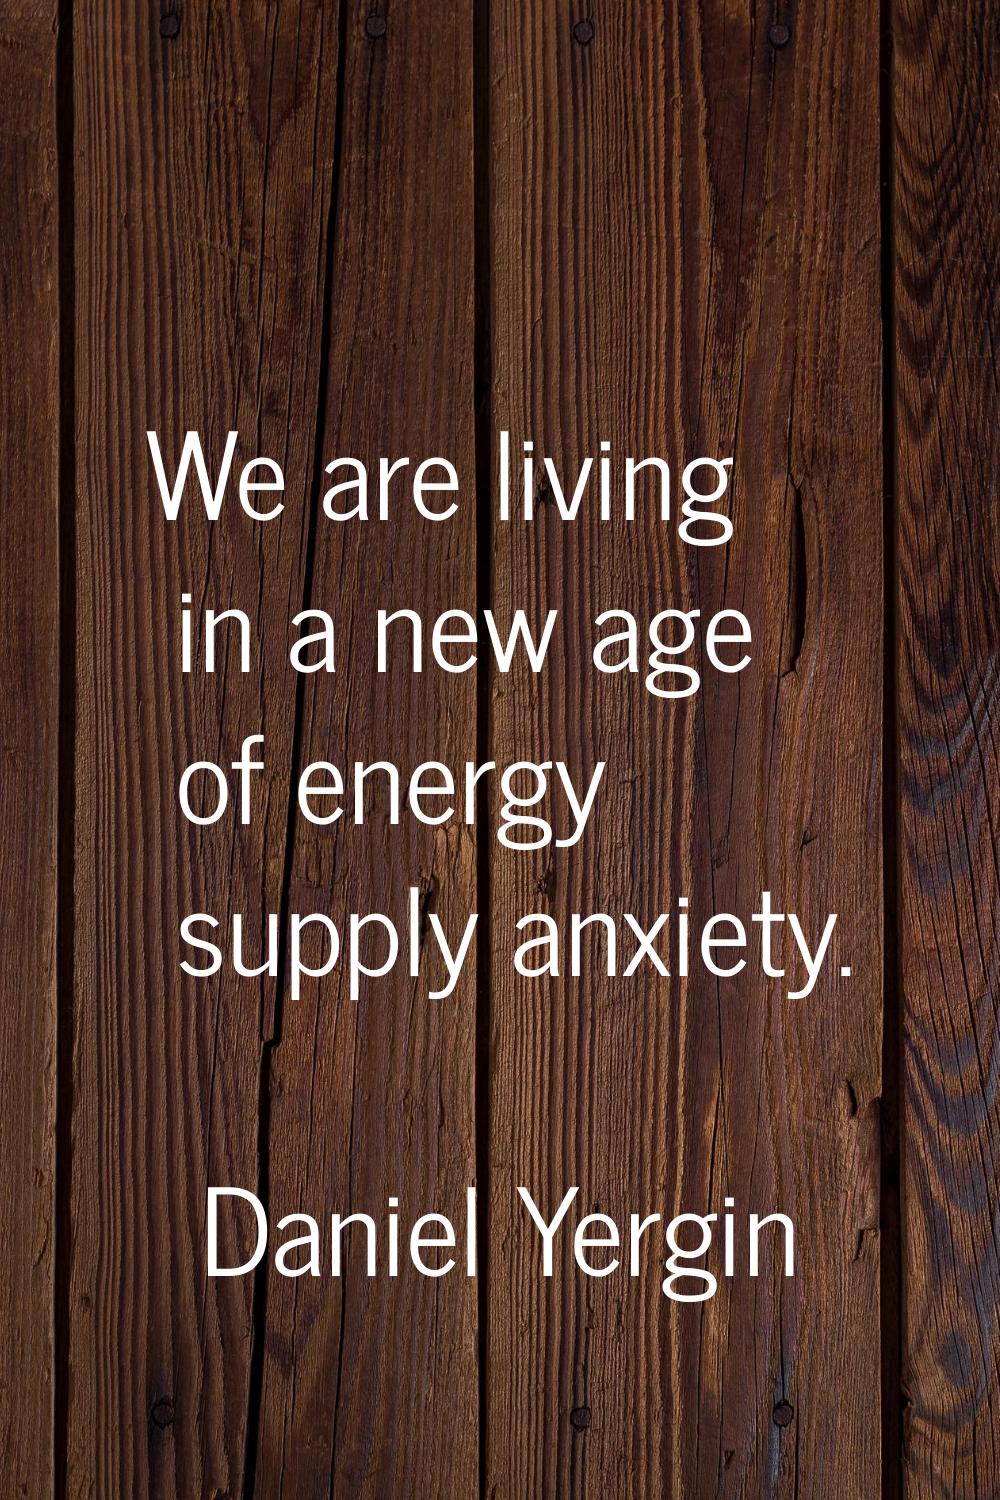 We are living in a new age of energy supply anxiety.